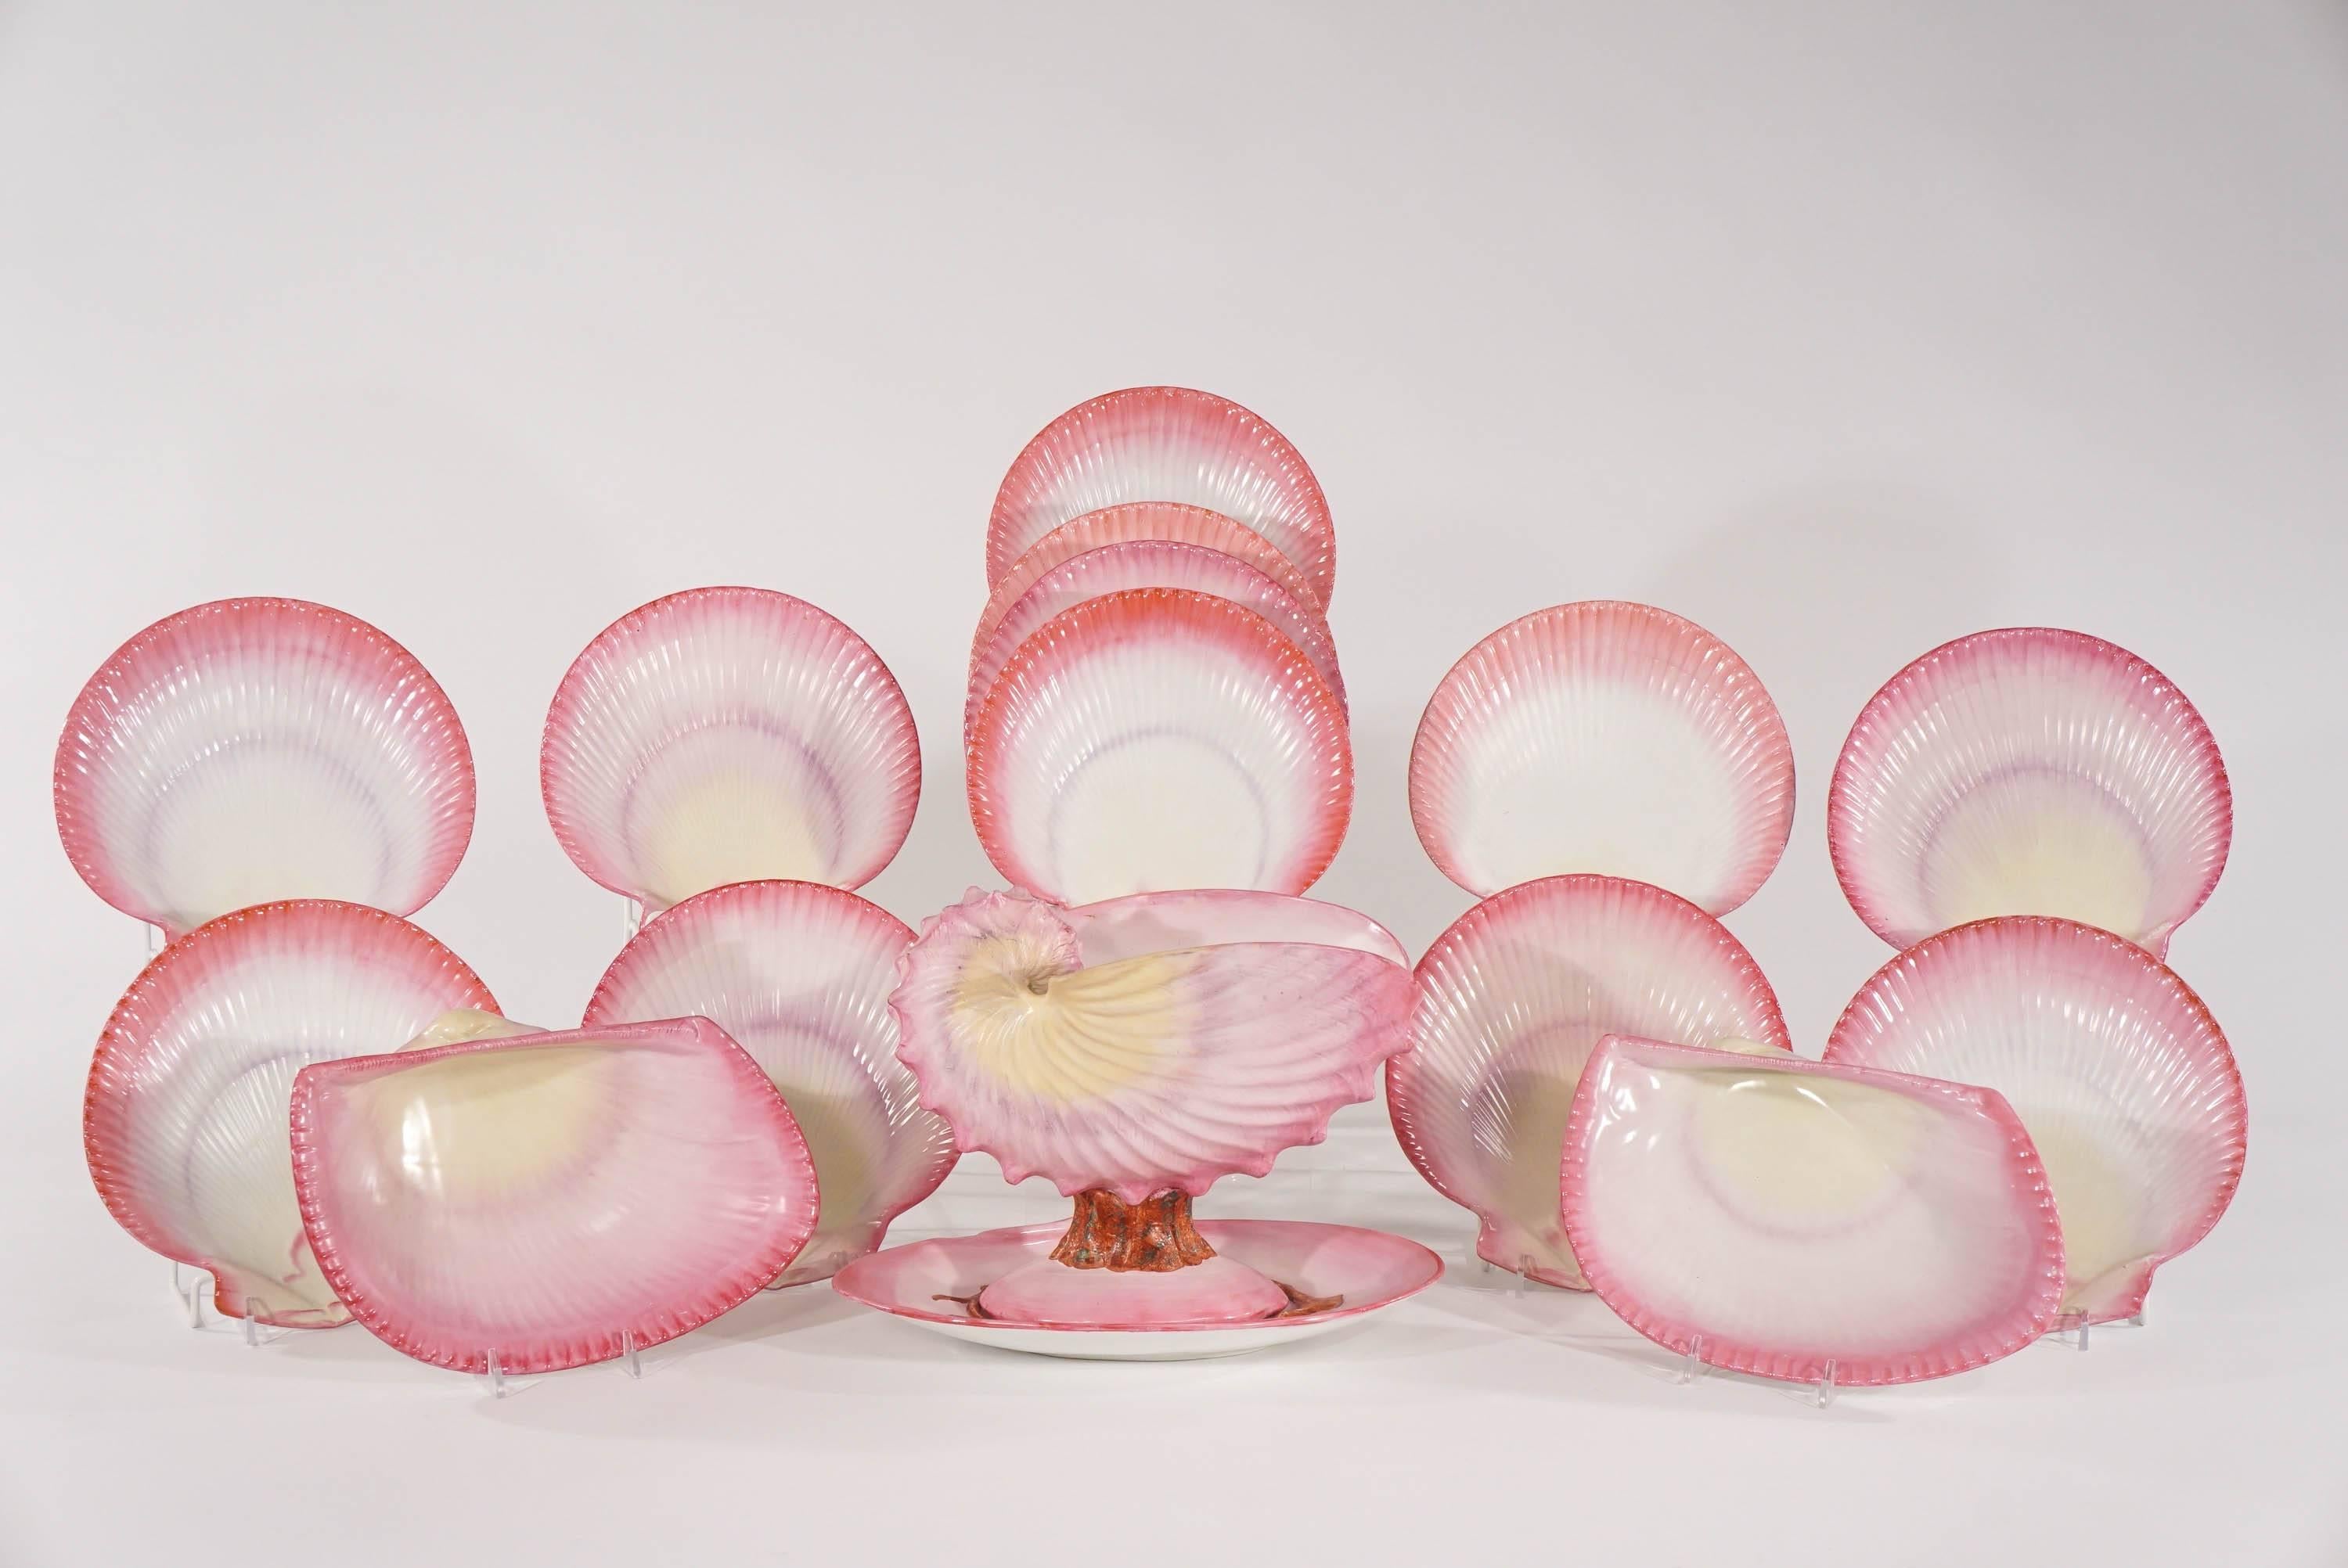 This 19th century Wedgwood dessert service consists of a footed centerpiece and stand, 12 scallop shaped dessert plates and two large clam shell plates with a shaded pink glaze that varies on each piece. The molded plates are realistically shaped as